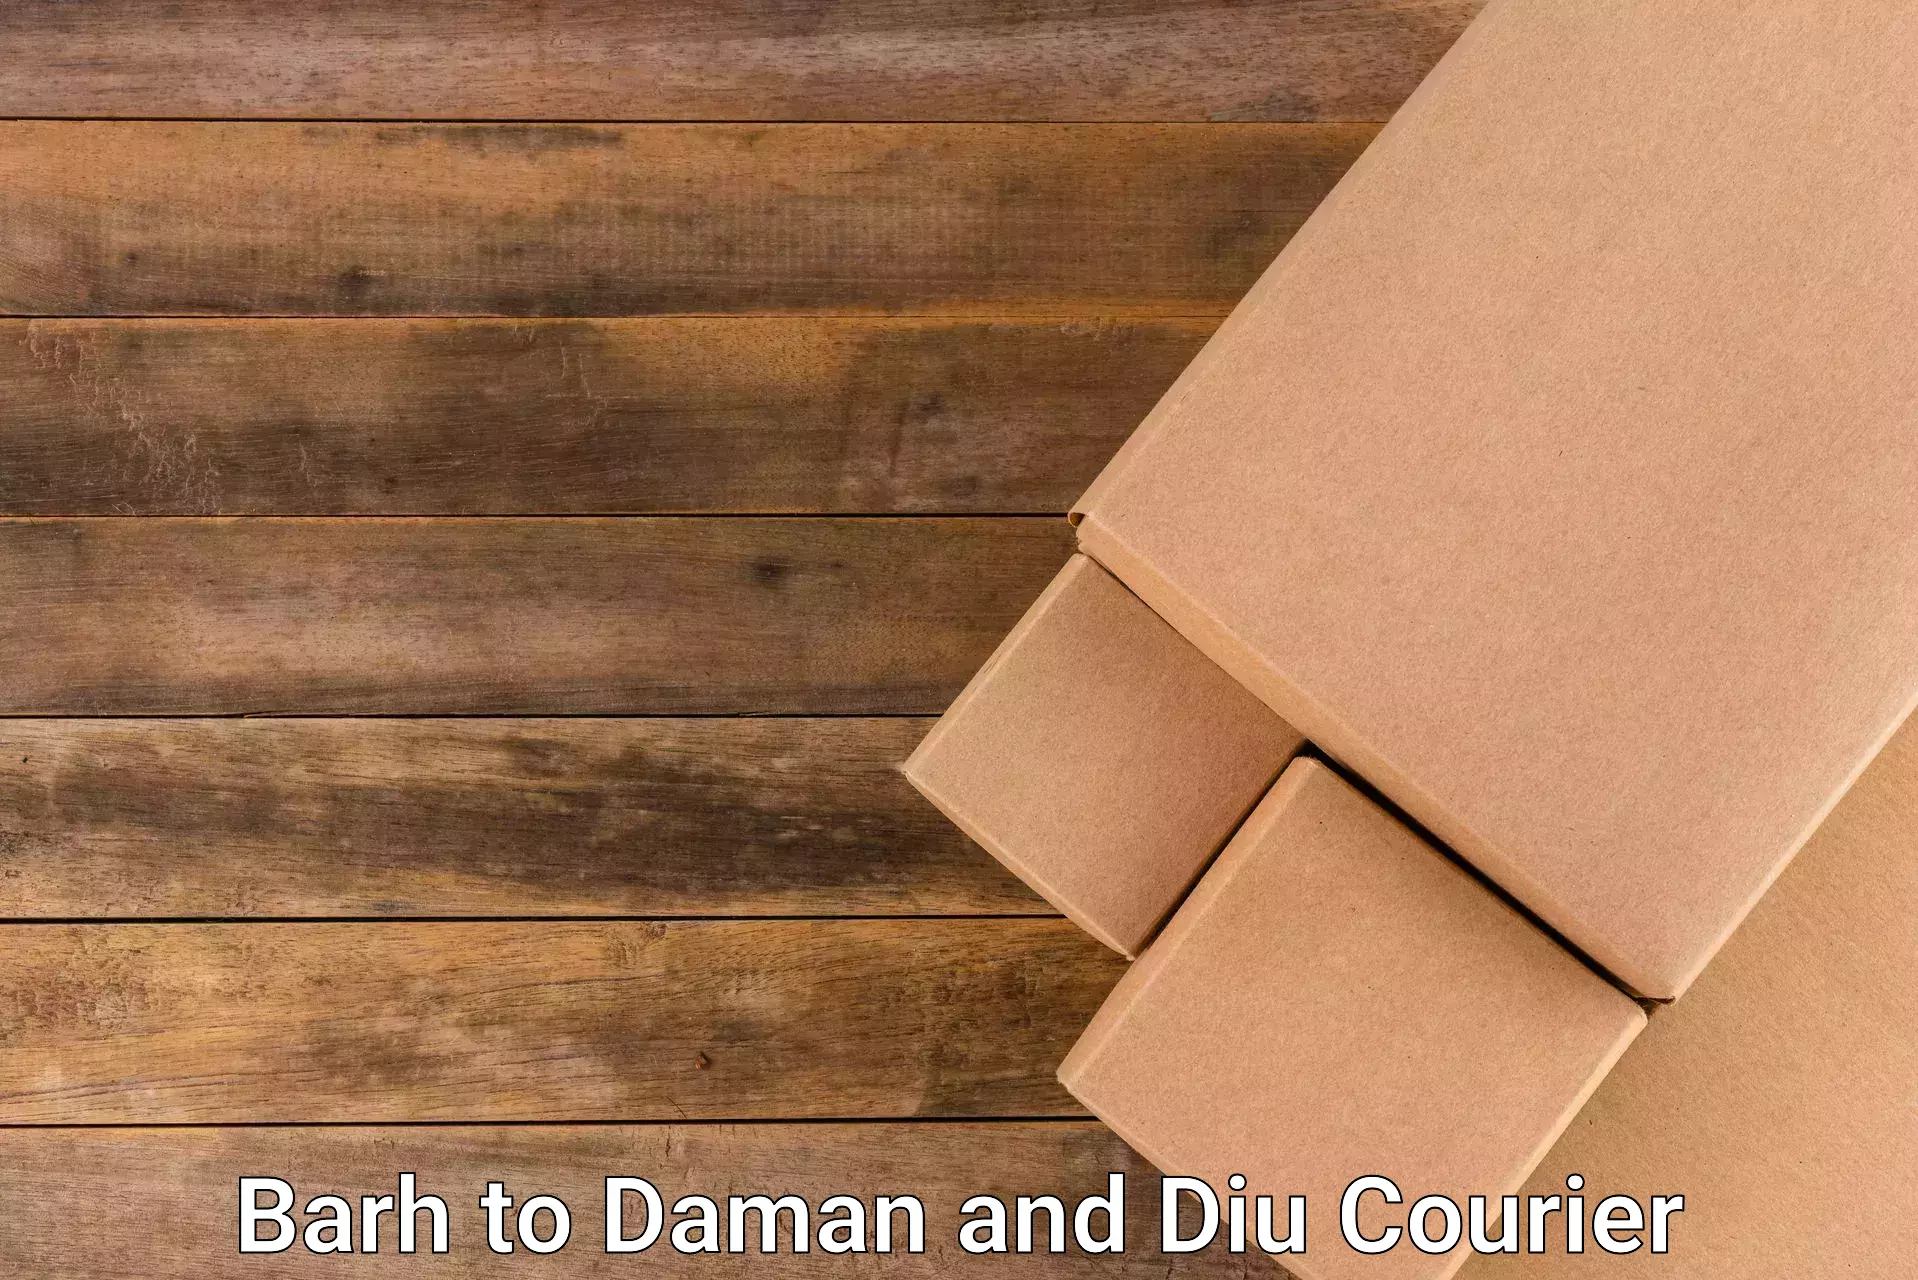 Express delivery solutions Barh to Daman and Diu